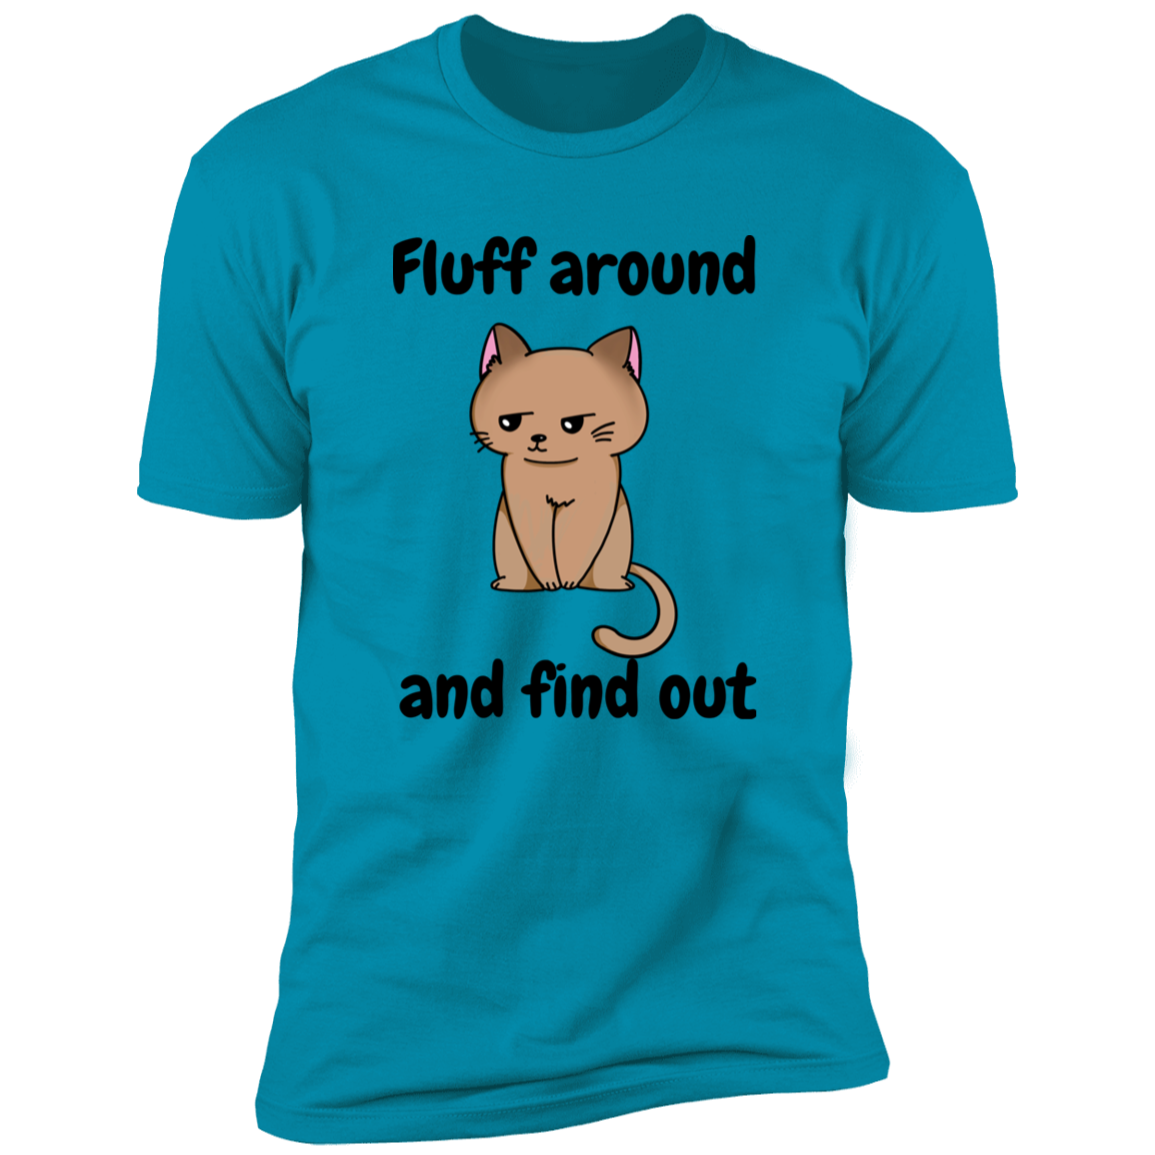 Fluff Around and Find Out Cat Shirt, funny cat shirt, funny cat shirt for humans, in turquoise